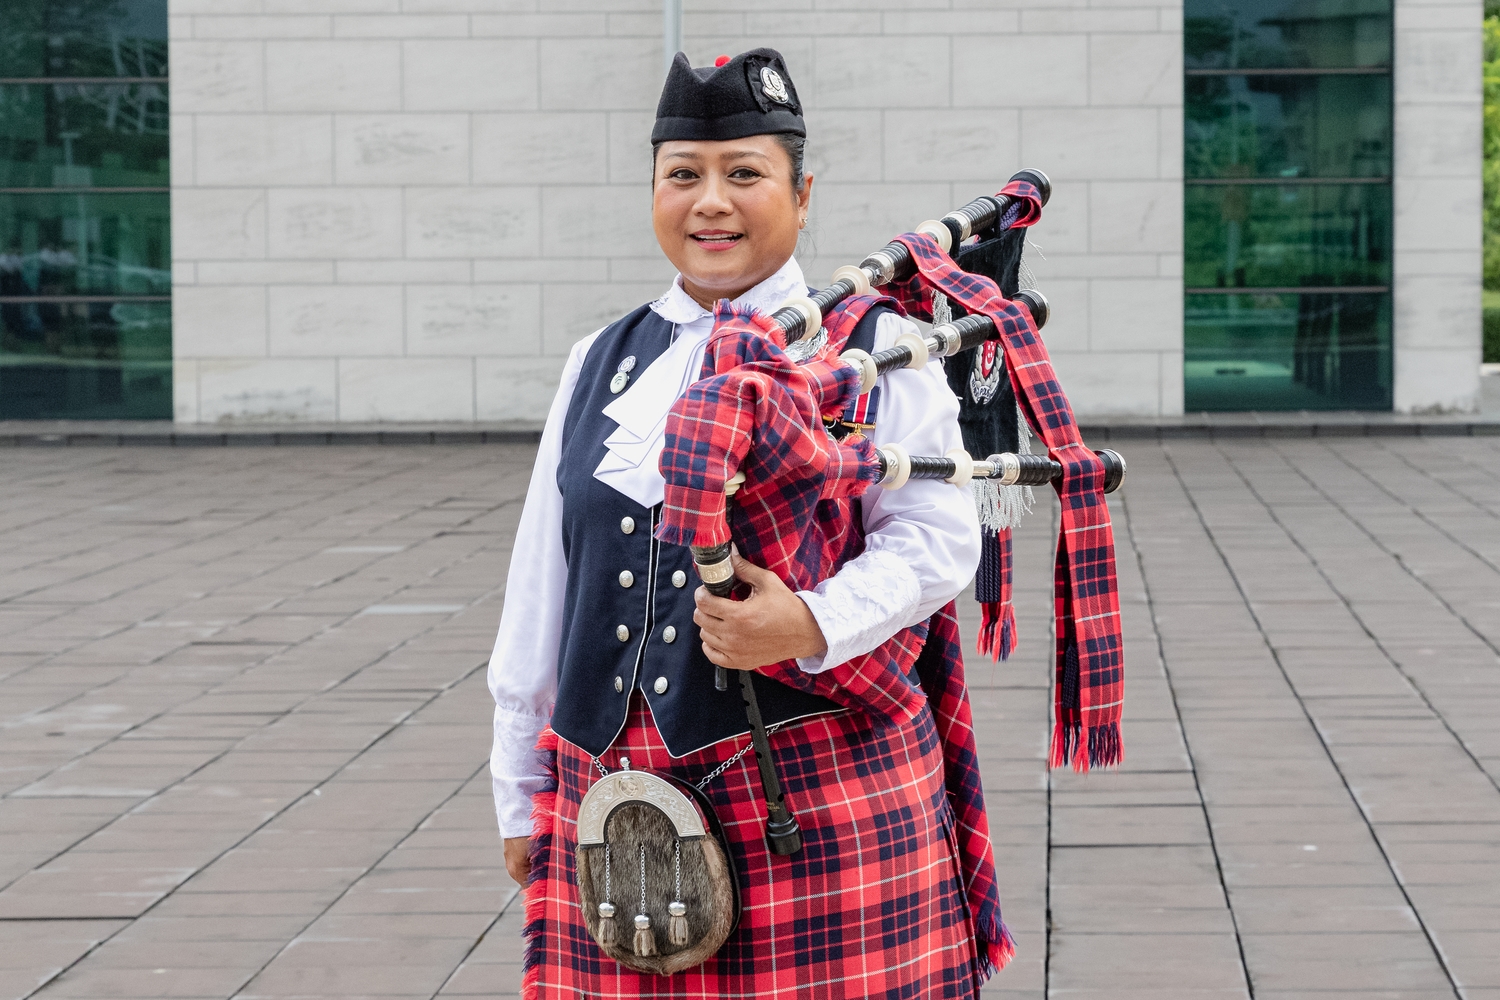 SI Julizah Binti Kassim stands smiling in front of the camera, holding her bagpipe over her shoulder in her WPPD performance uniform